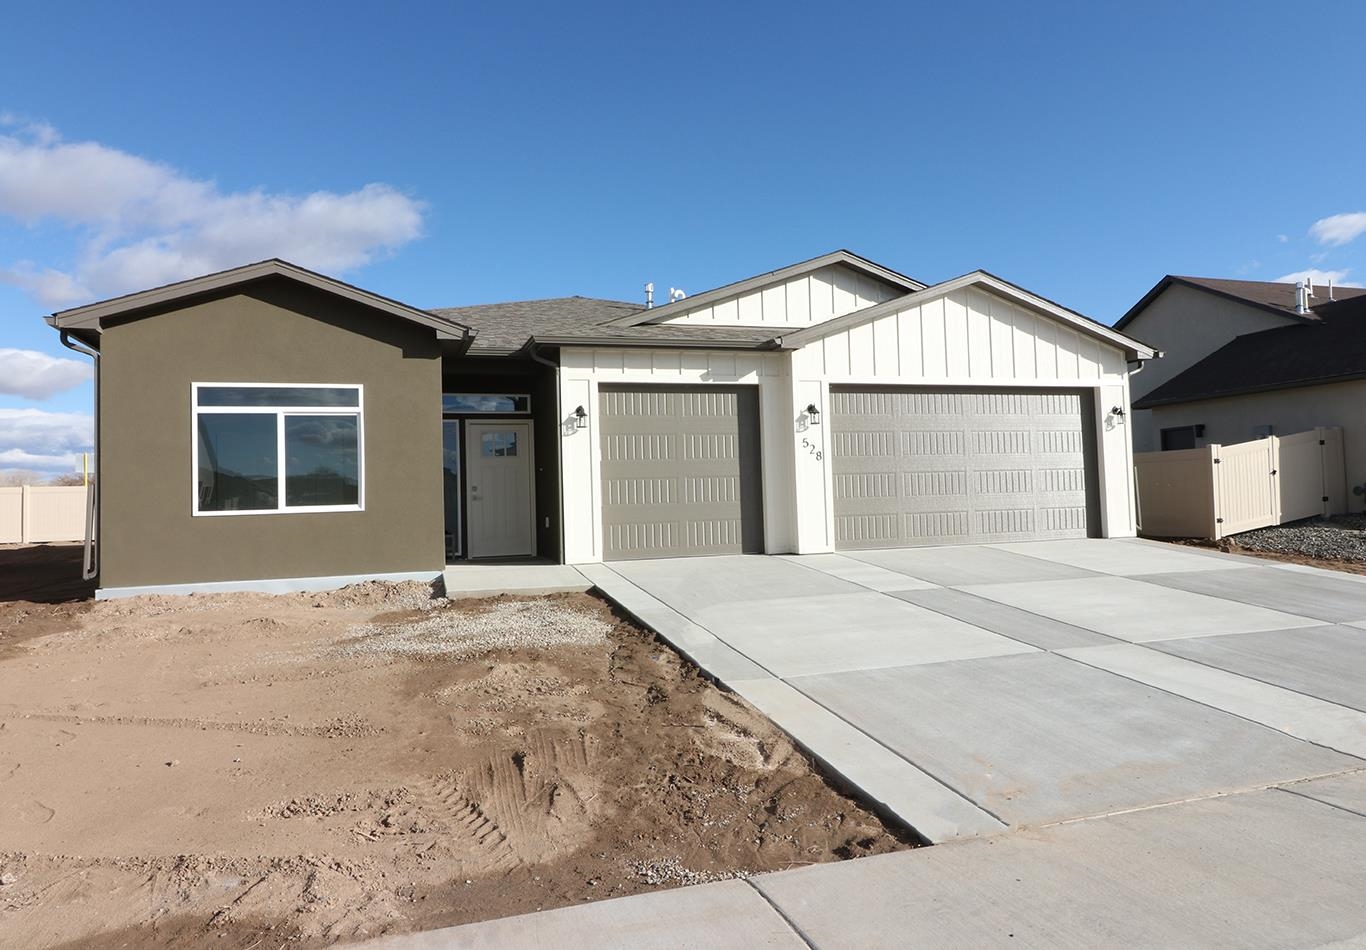 New Construction in Fruita that is located in a great neighborhood & is close to everything!! The light & bright open floor plan features 4 bed, 2 bath, 3 car garage. Master suite features a private bath w/ walk in shower, his/ her sinks & walk in closet. Granite counters, stainless steel appliances, oversized master closet & so much more. Walking distance to Fruita 8/9 & high school & easy access to downtown for farmers market & festivals! Come take a closer look! Est. completion mid November - There is also a $20,000 landscape allowance included in the price of this home.